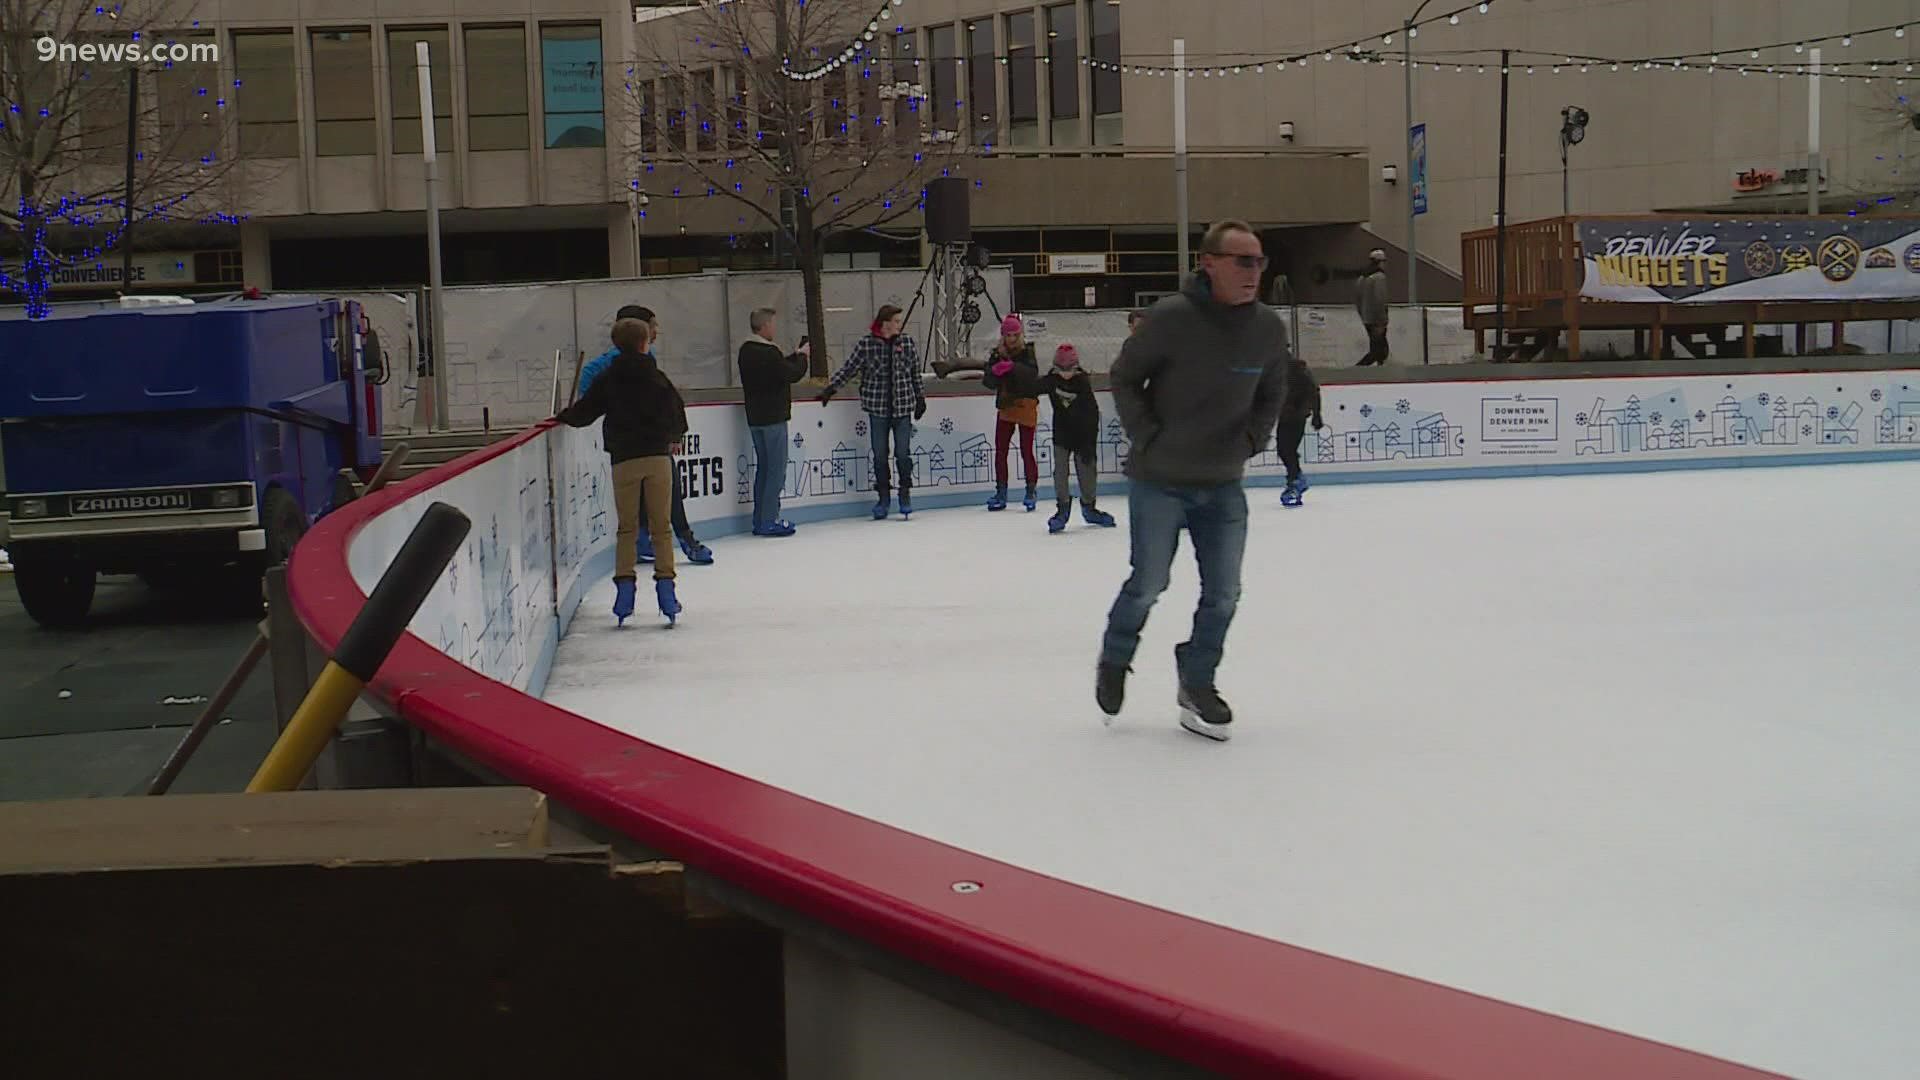 The rink is open now through February at skyline park. It's free if you have your own skates.